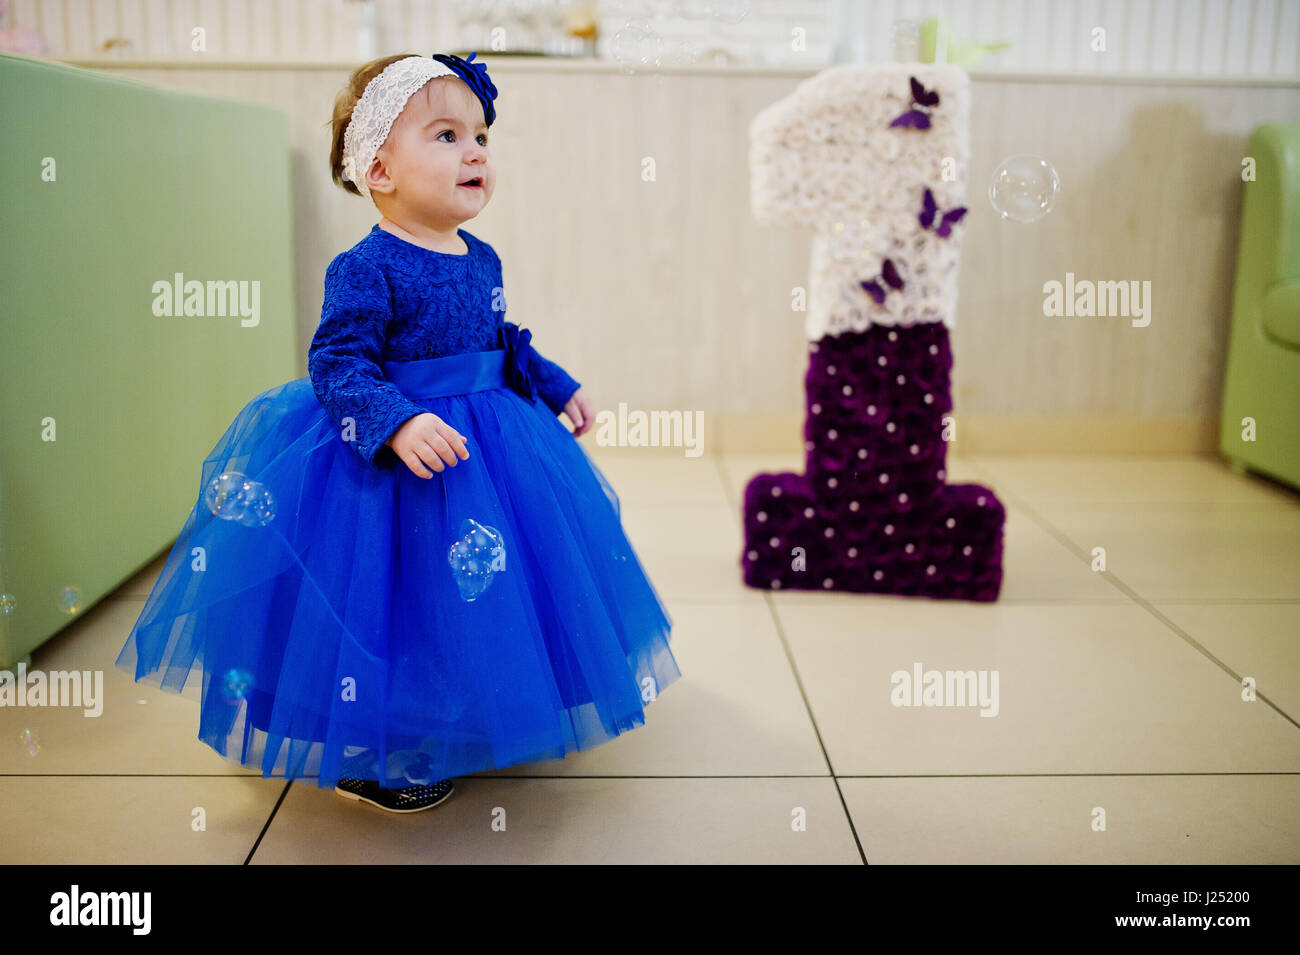 cute dresses for 1 year old